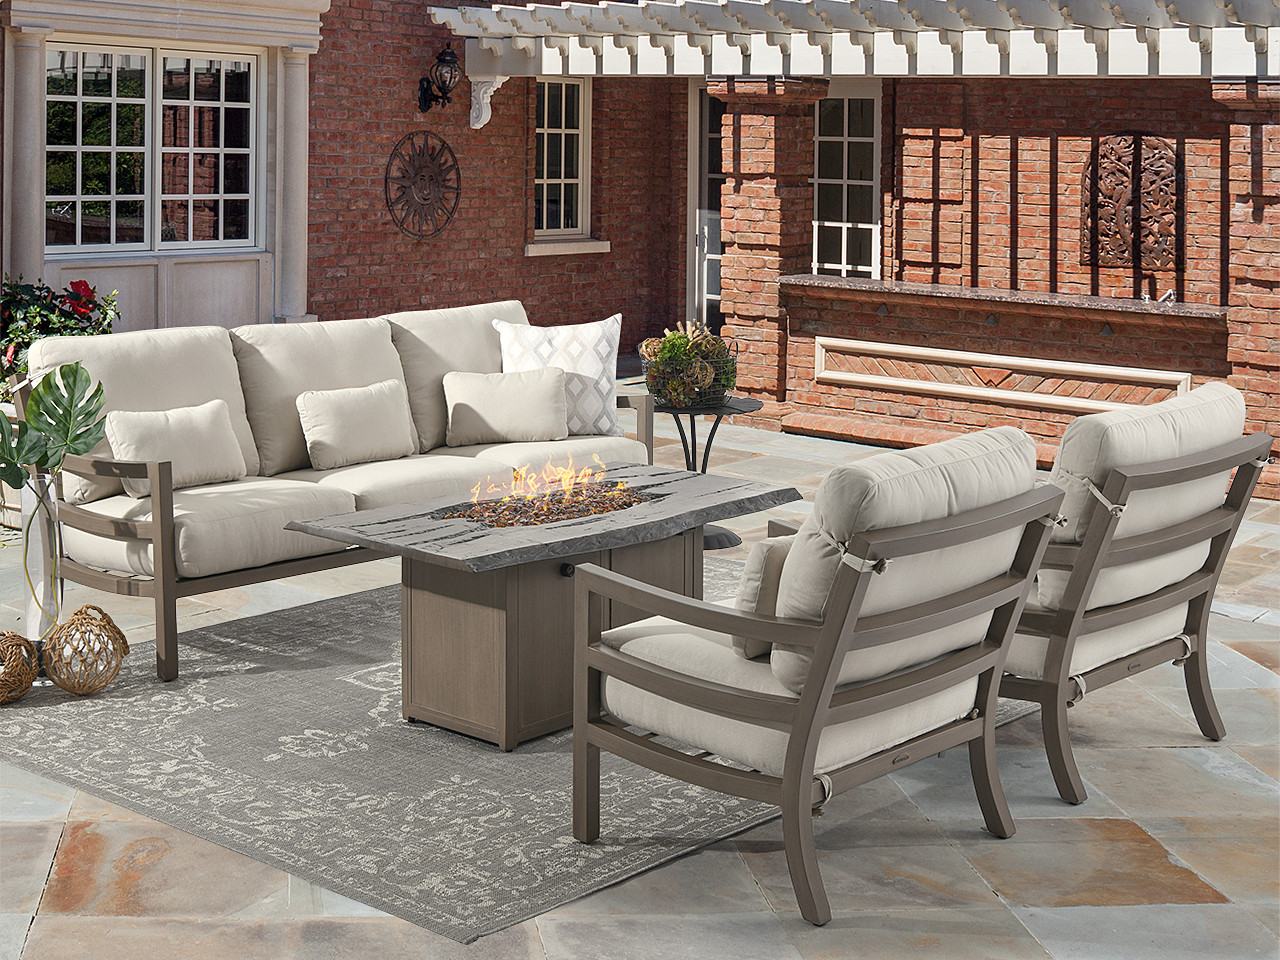 Roma Weathered Wood Aluminum and Sand Linen Cushion 4 Pc. Sofa Group with 54 x 29 in. Fire Pit